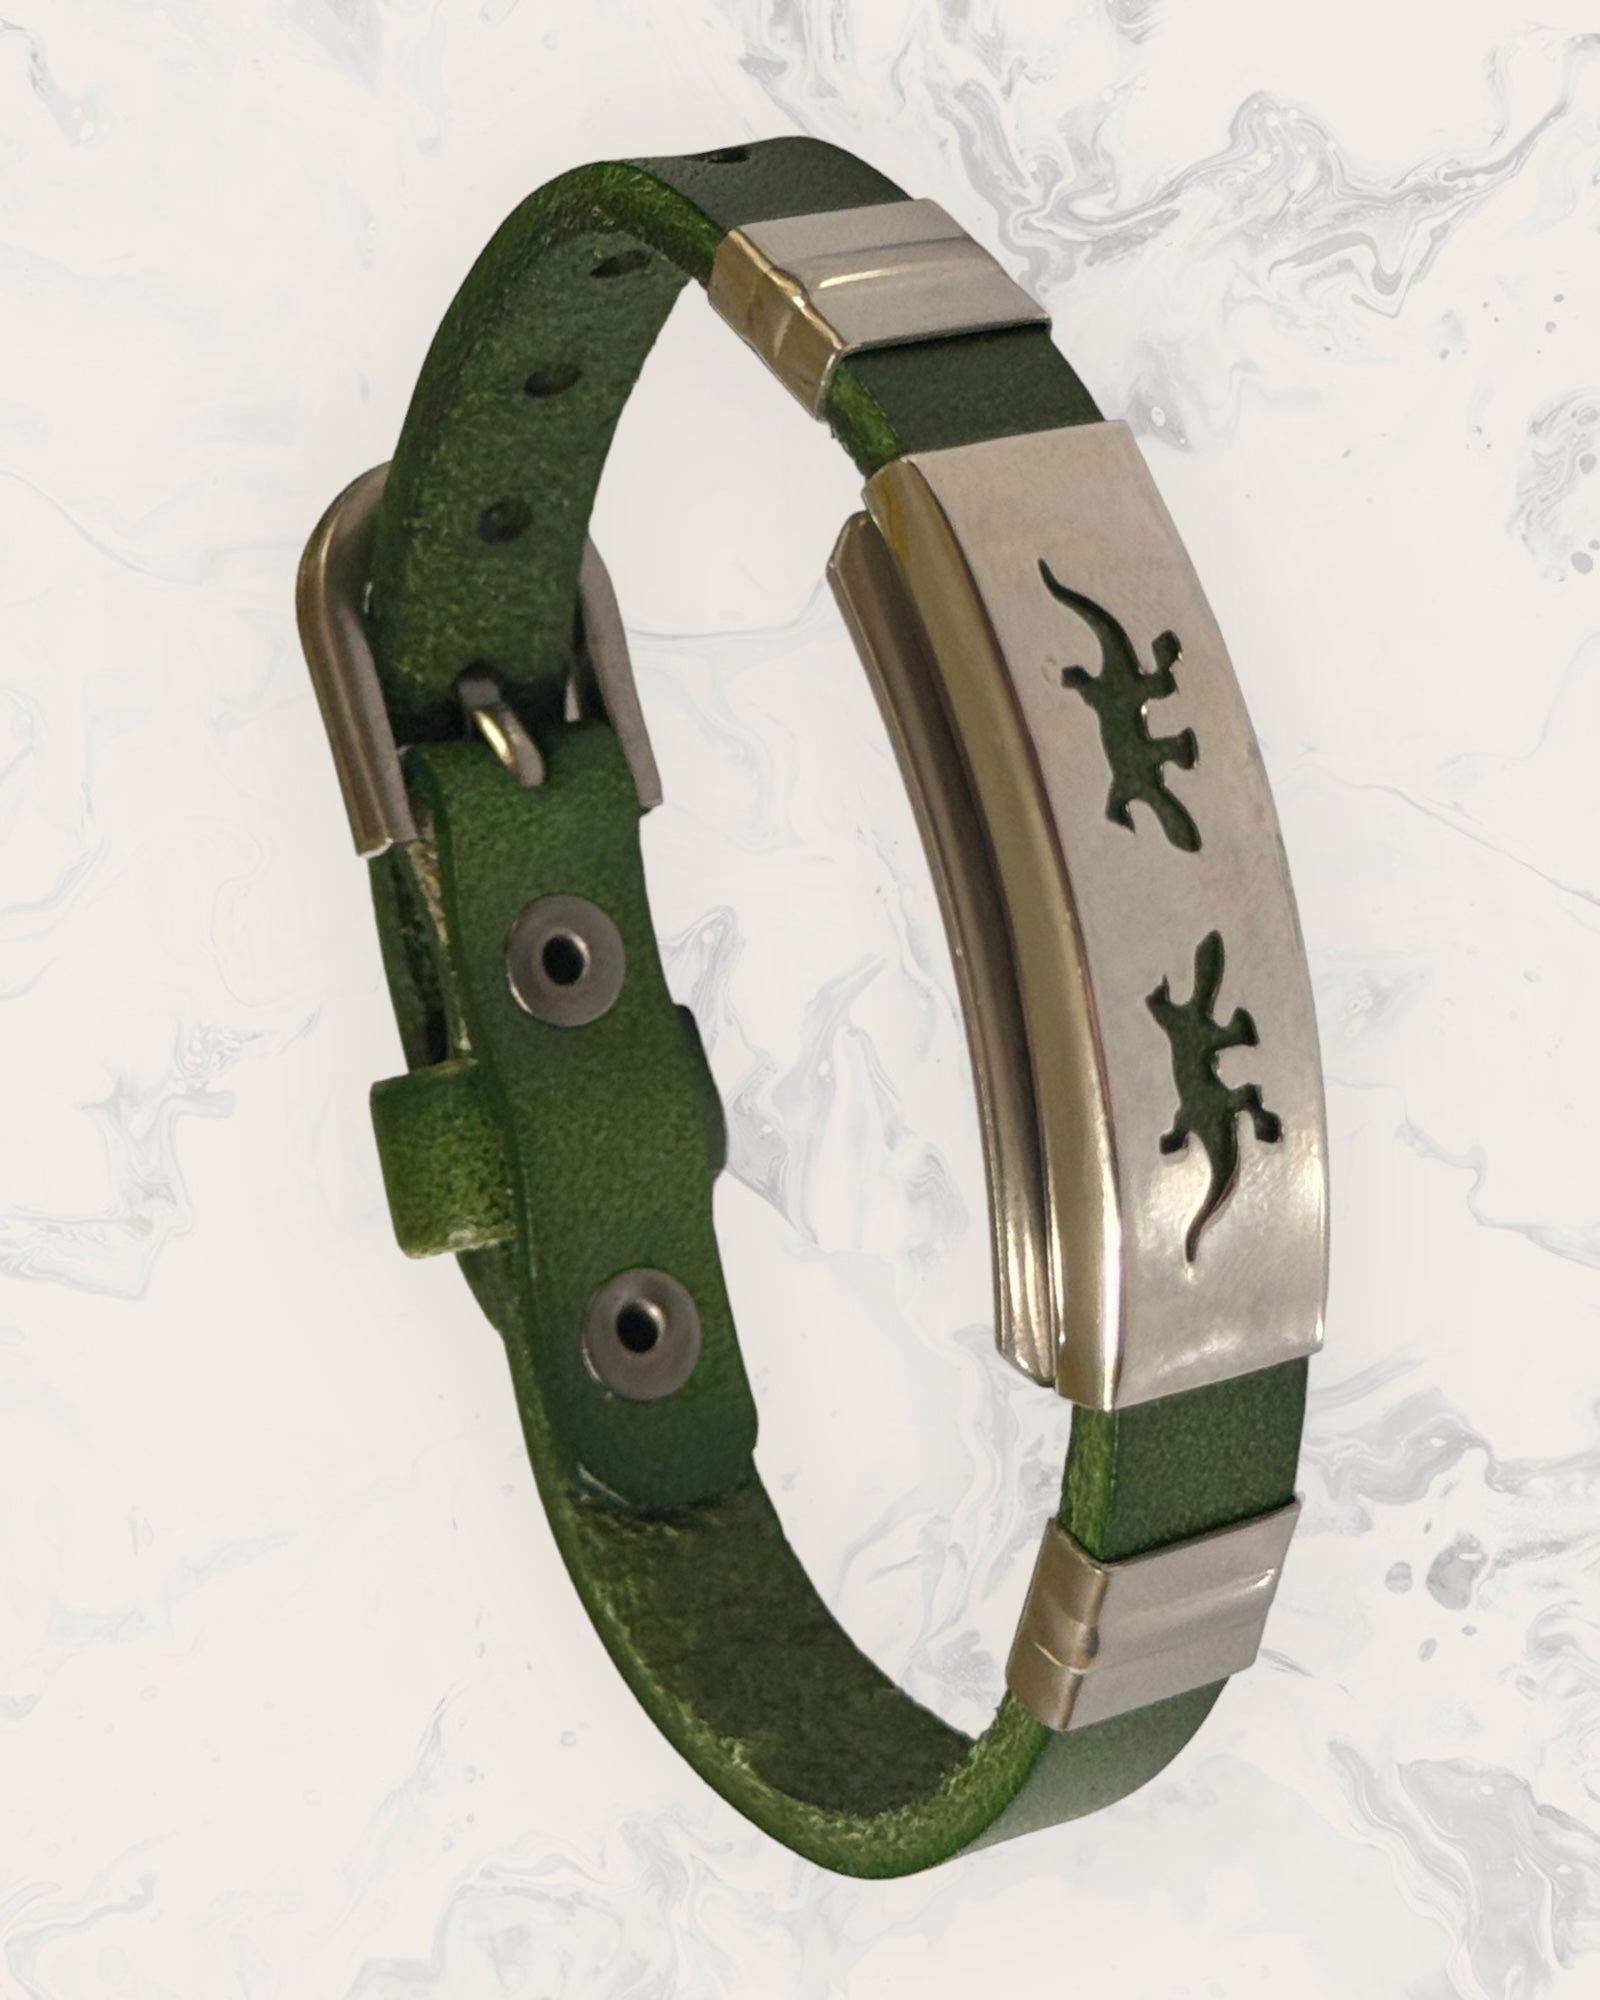 Natural Pain Relief and EMF Protection Bracelet Leather Band Color Green with Two Geckos design on a silver metal slider